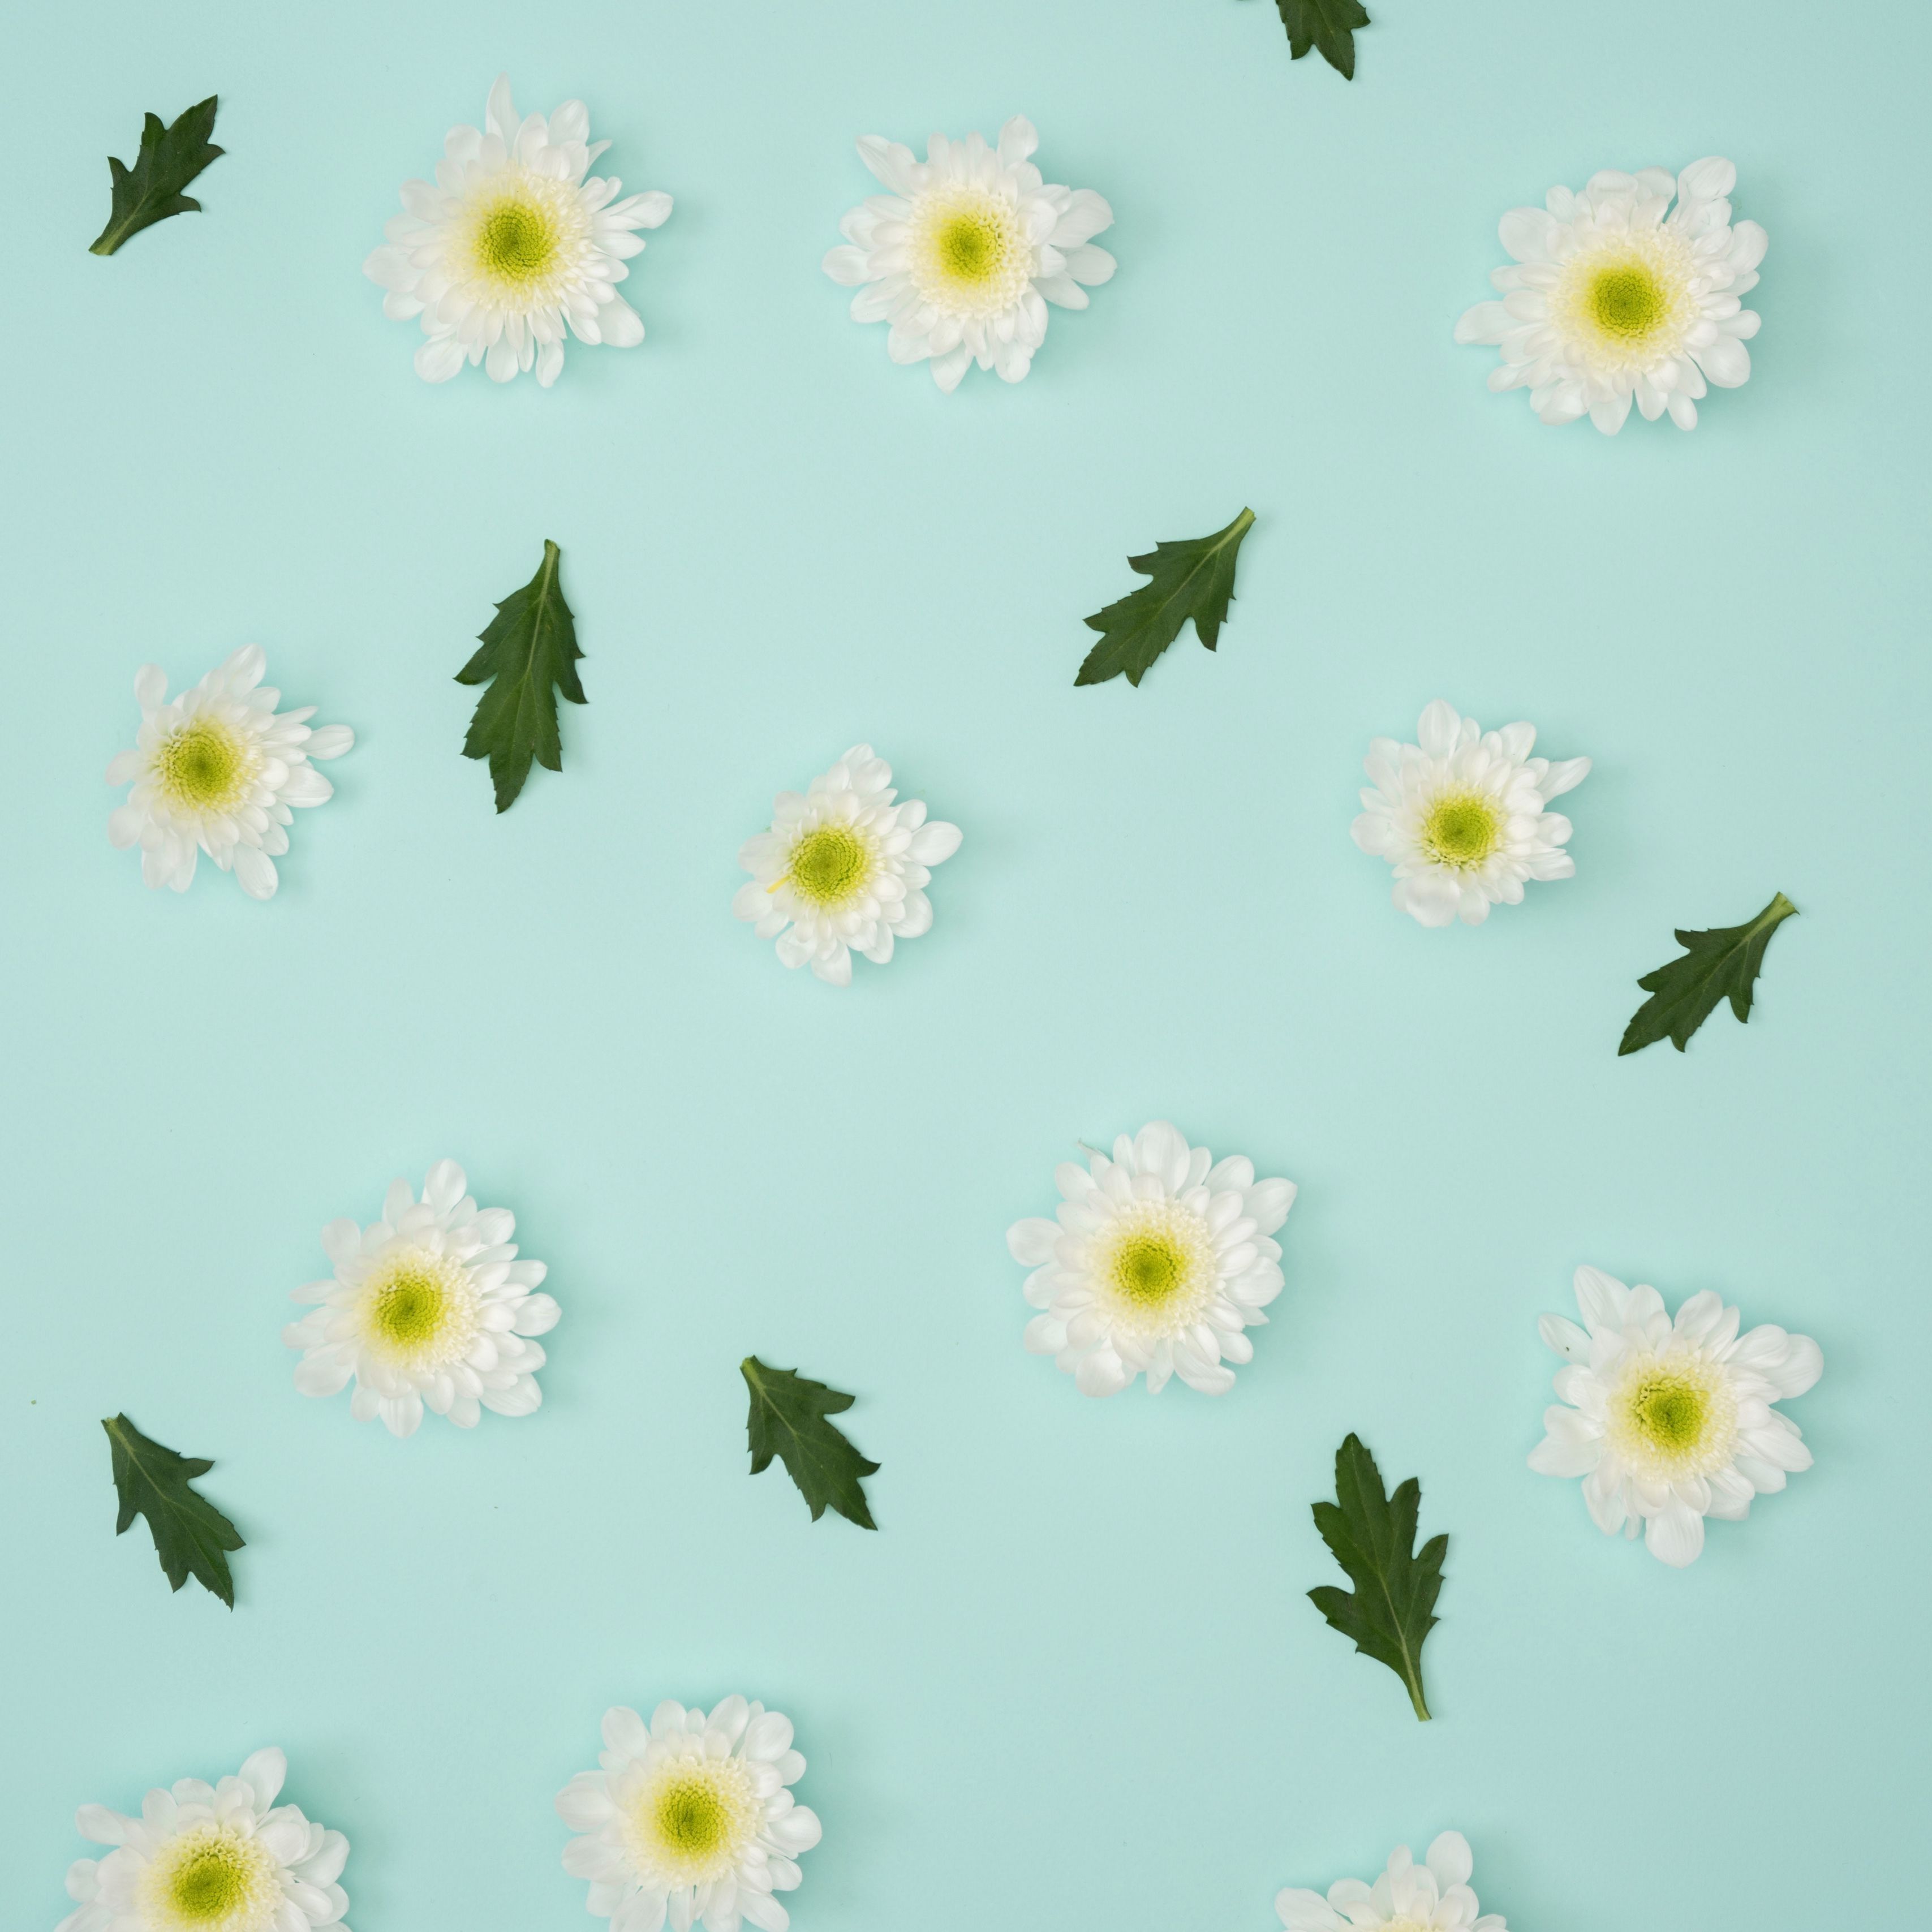 White flowers and green leaves on a blue background - Pastel minimalist